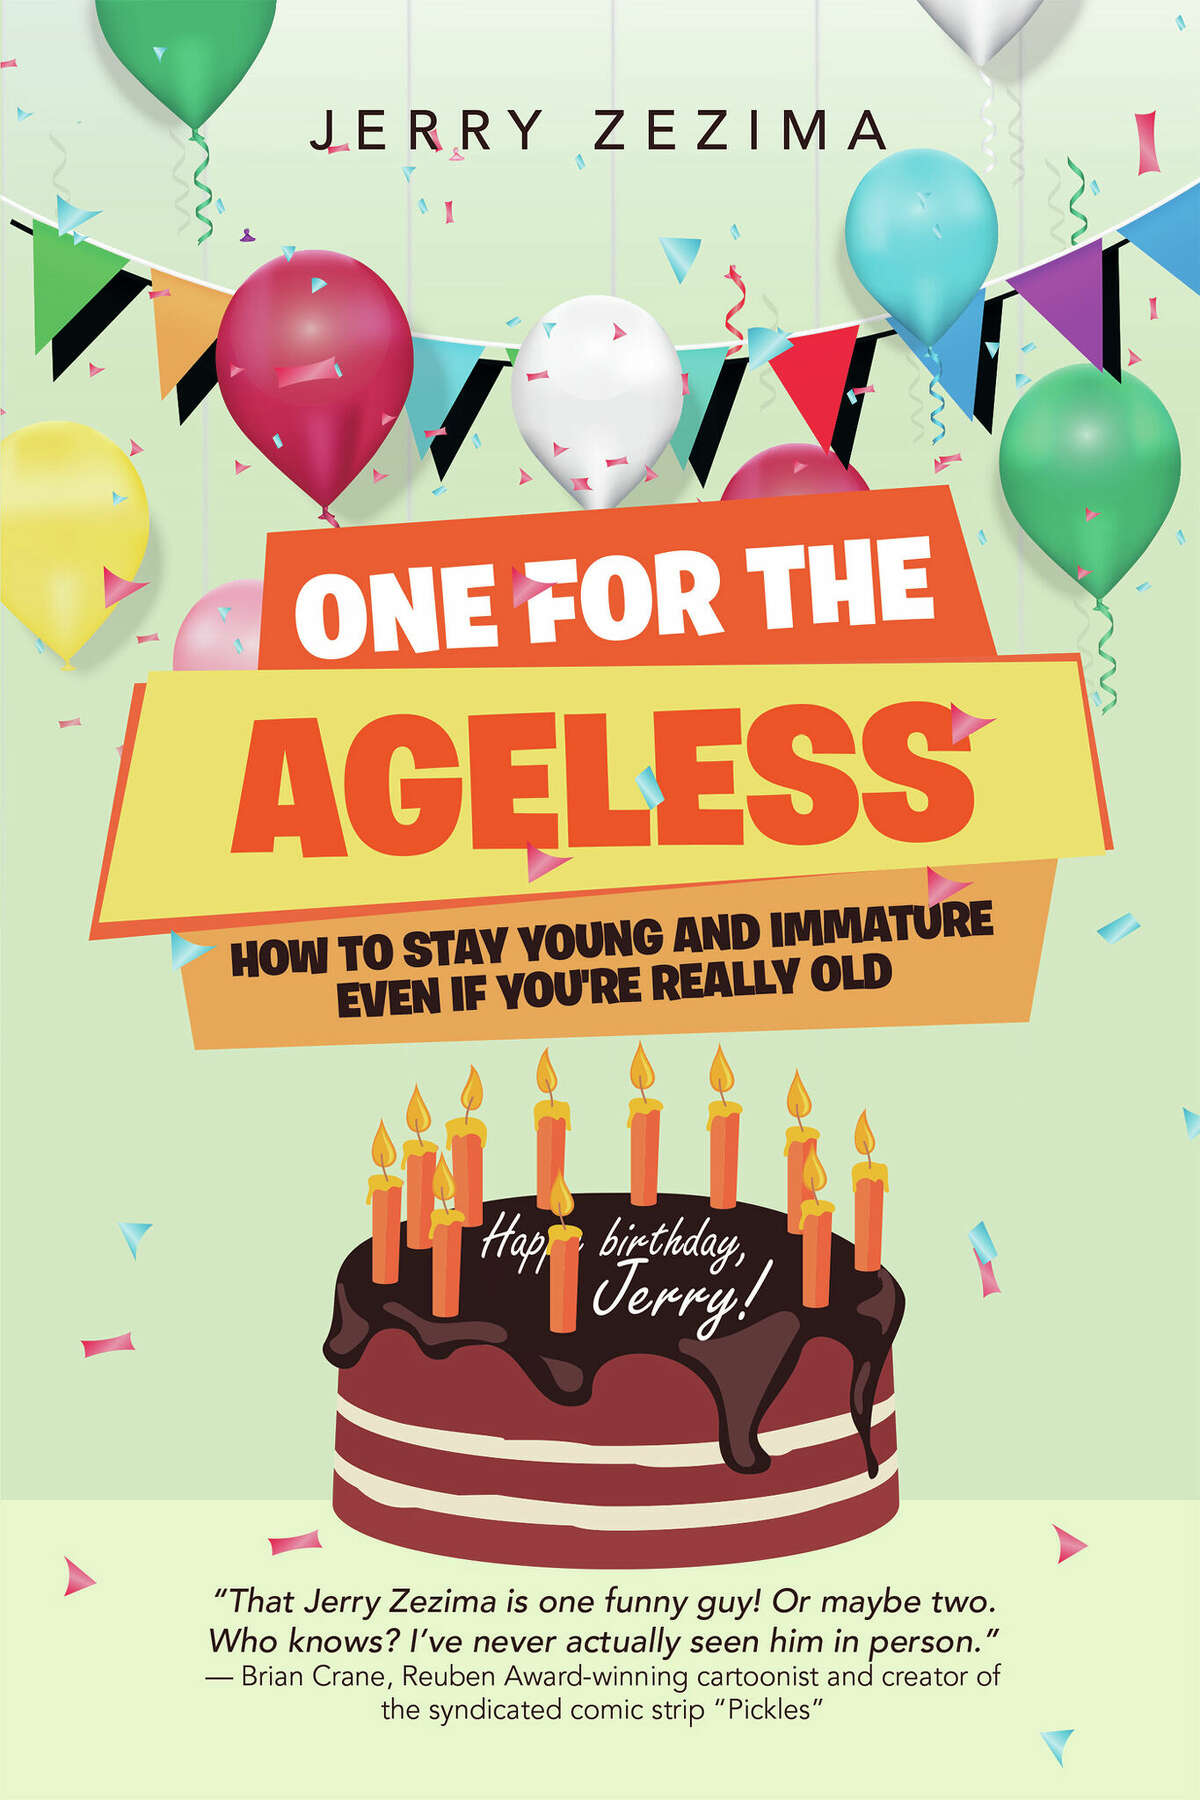 “One for the Ageless: How to Stay Young and Immature Even If You're Really Old" by Jerry Zezima. 